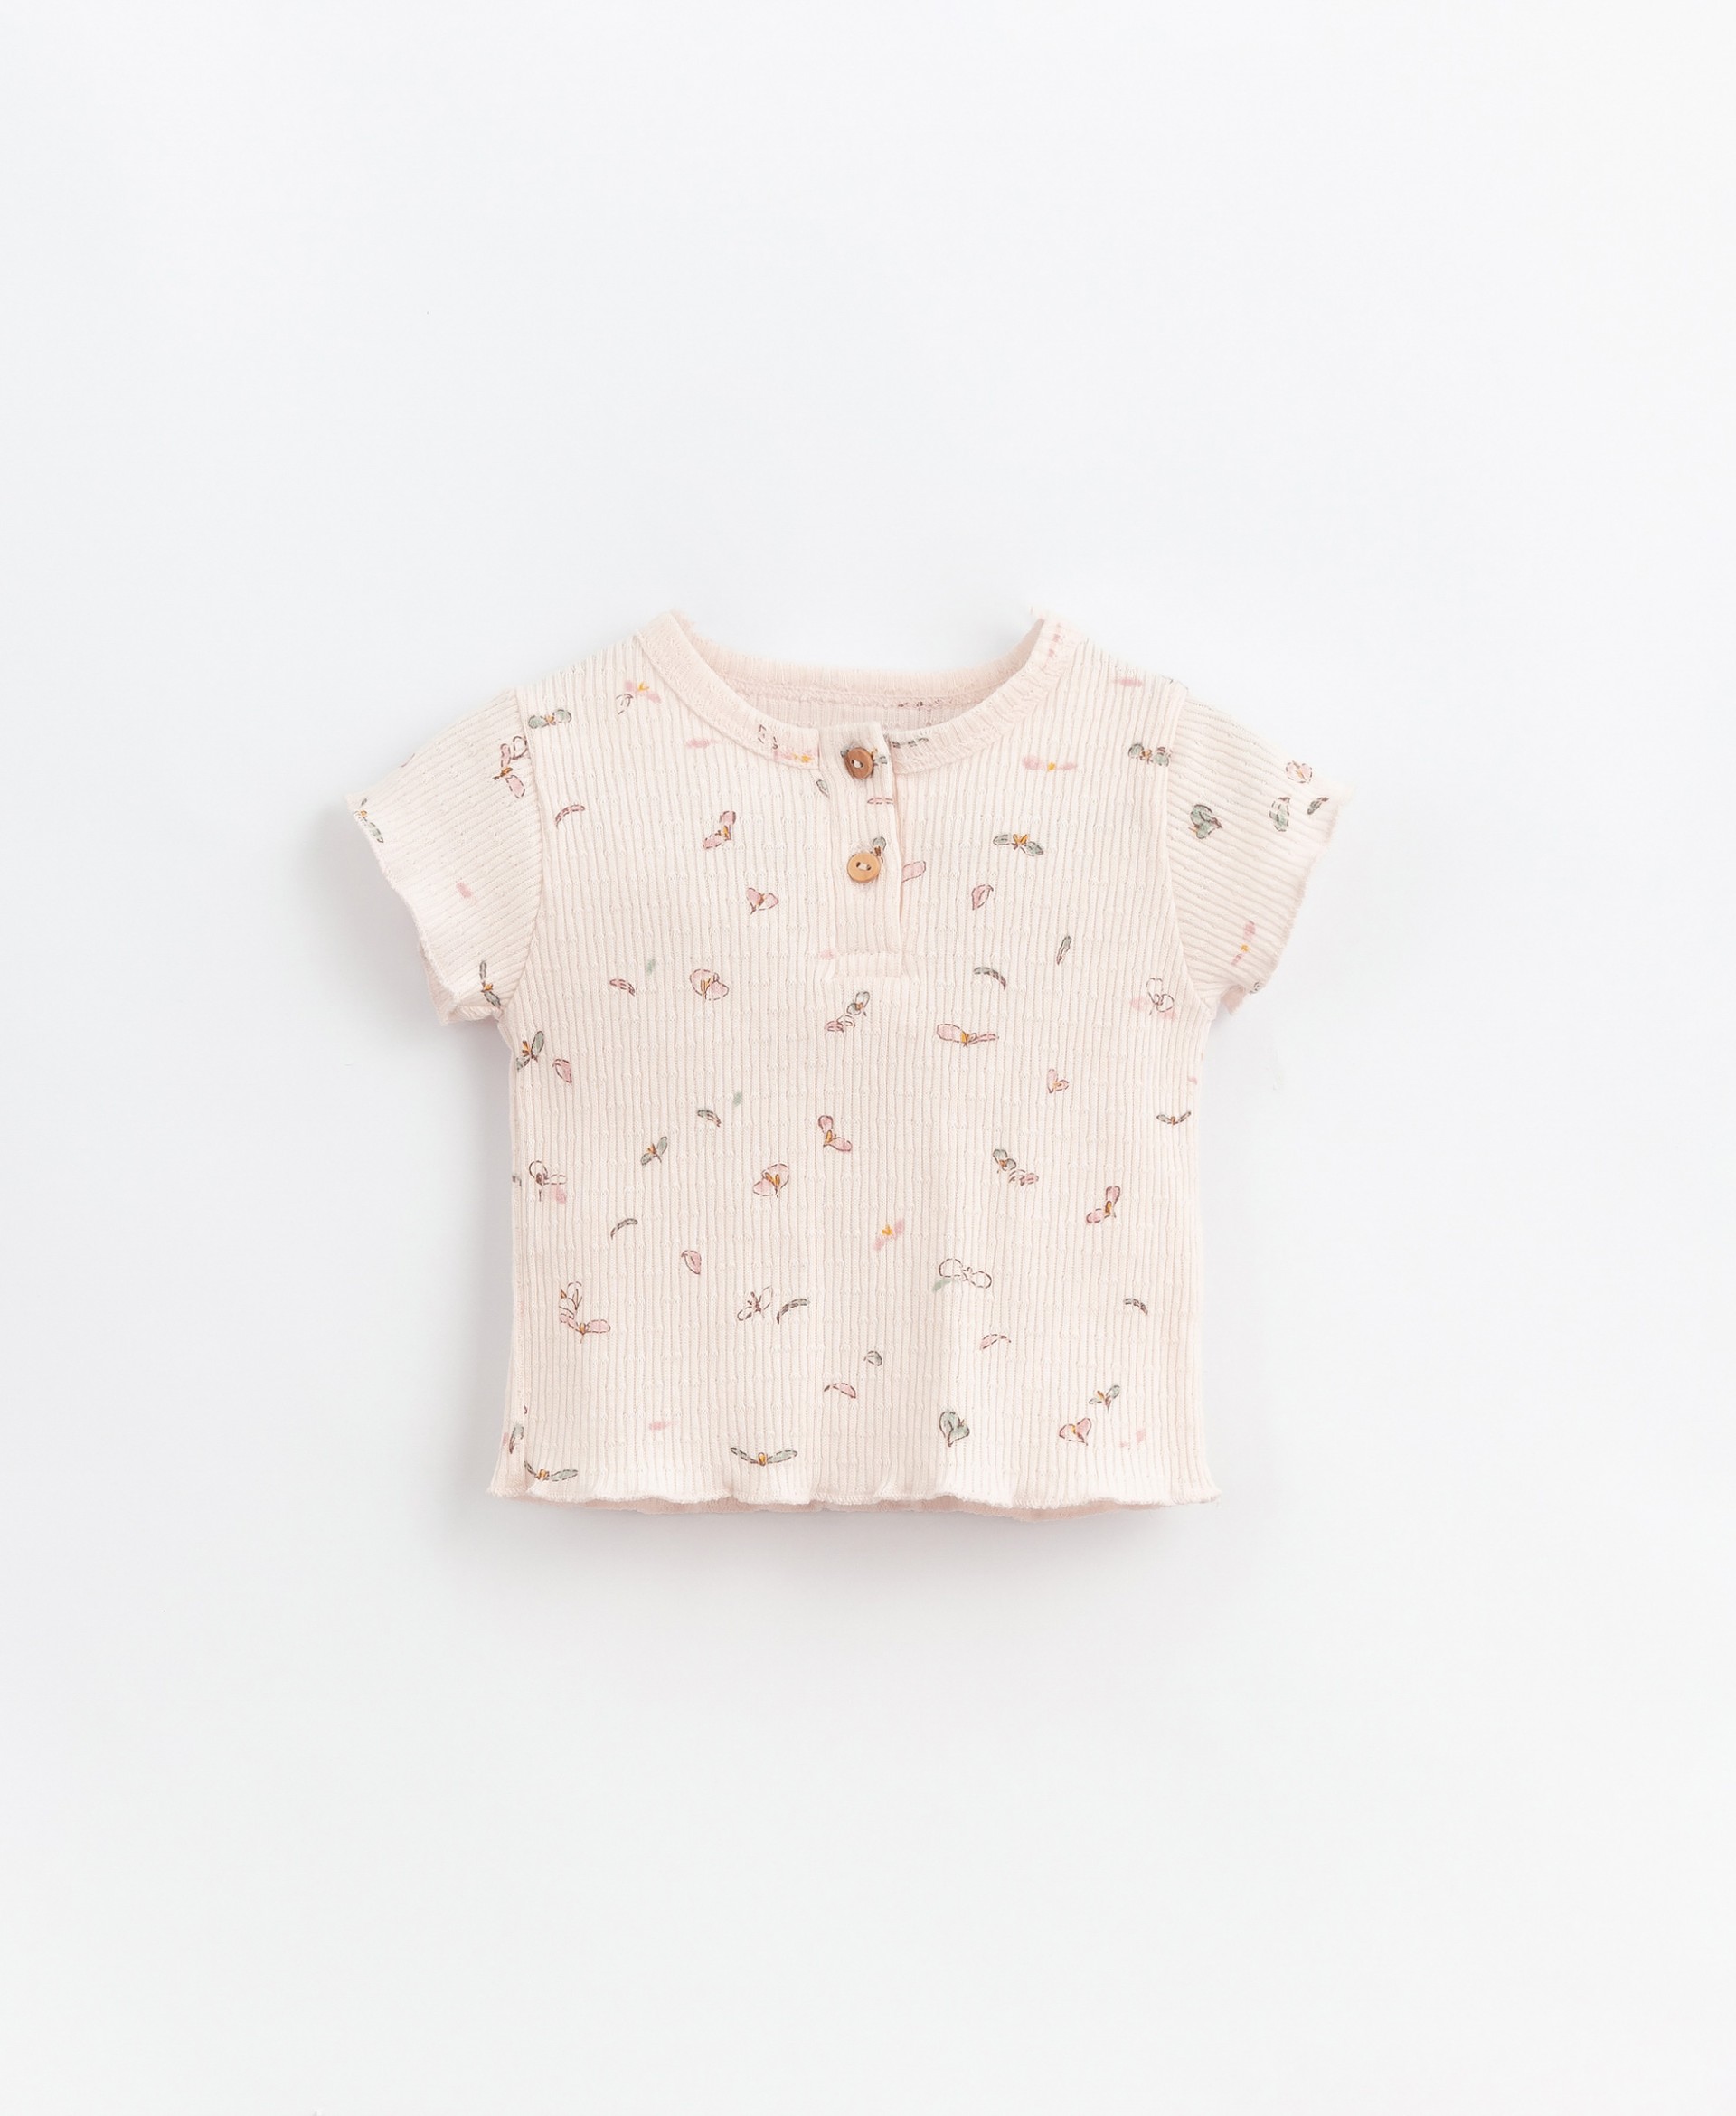 T-shirt in organic cotton with buttons | Basketry